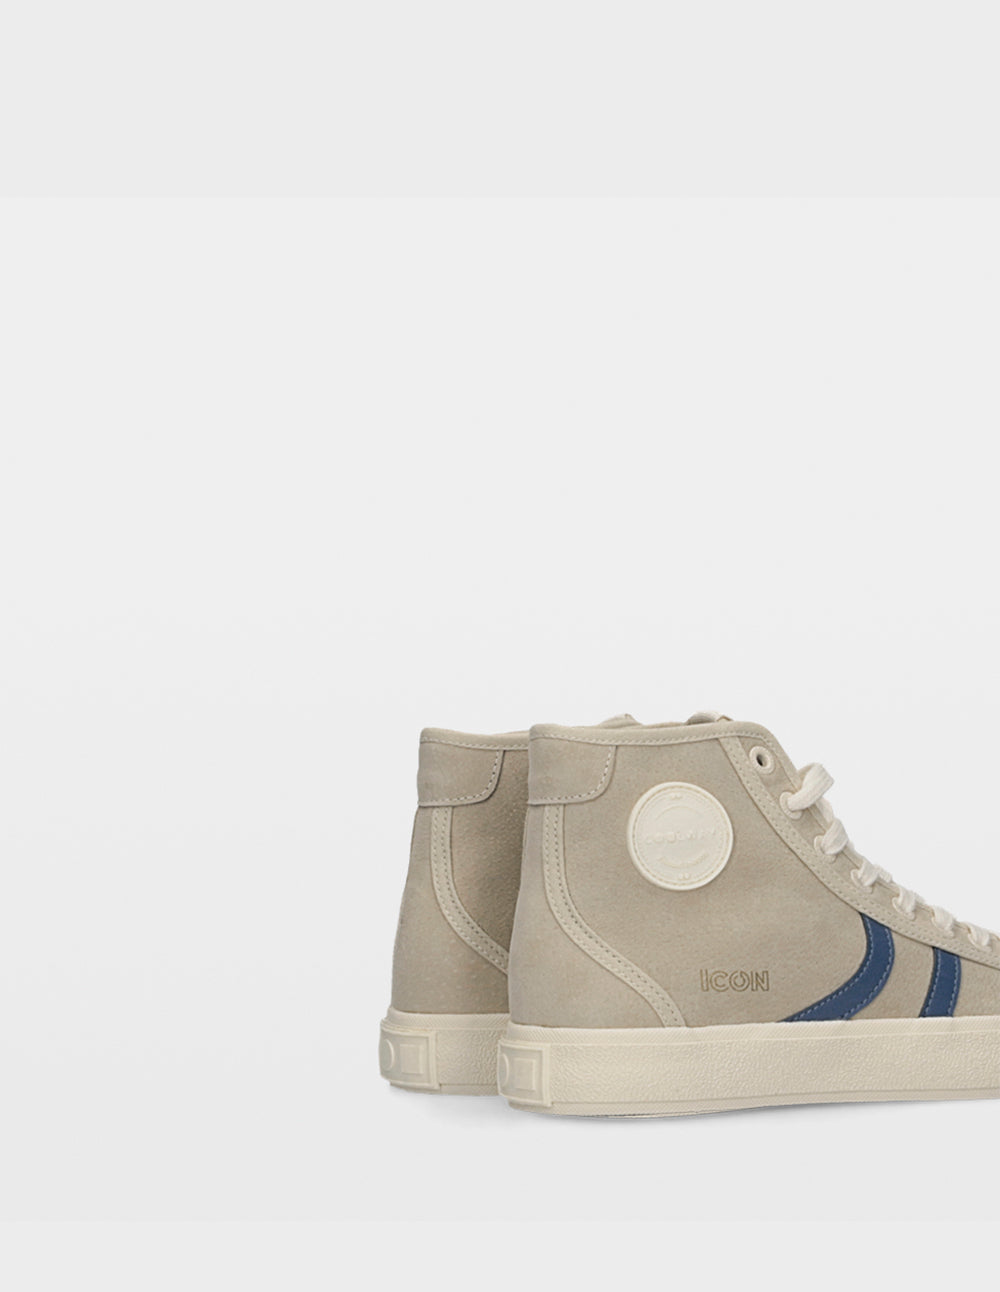 ICON-HI BEIGE/BLUE LEATHER MUJER